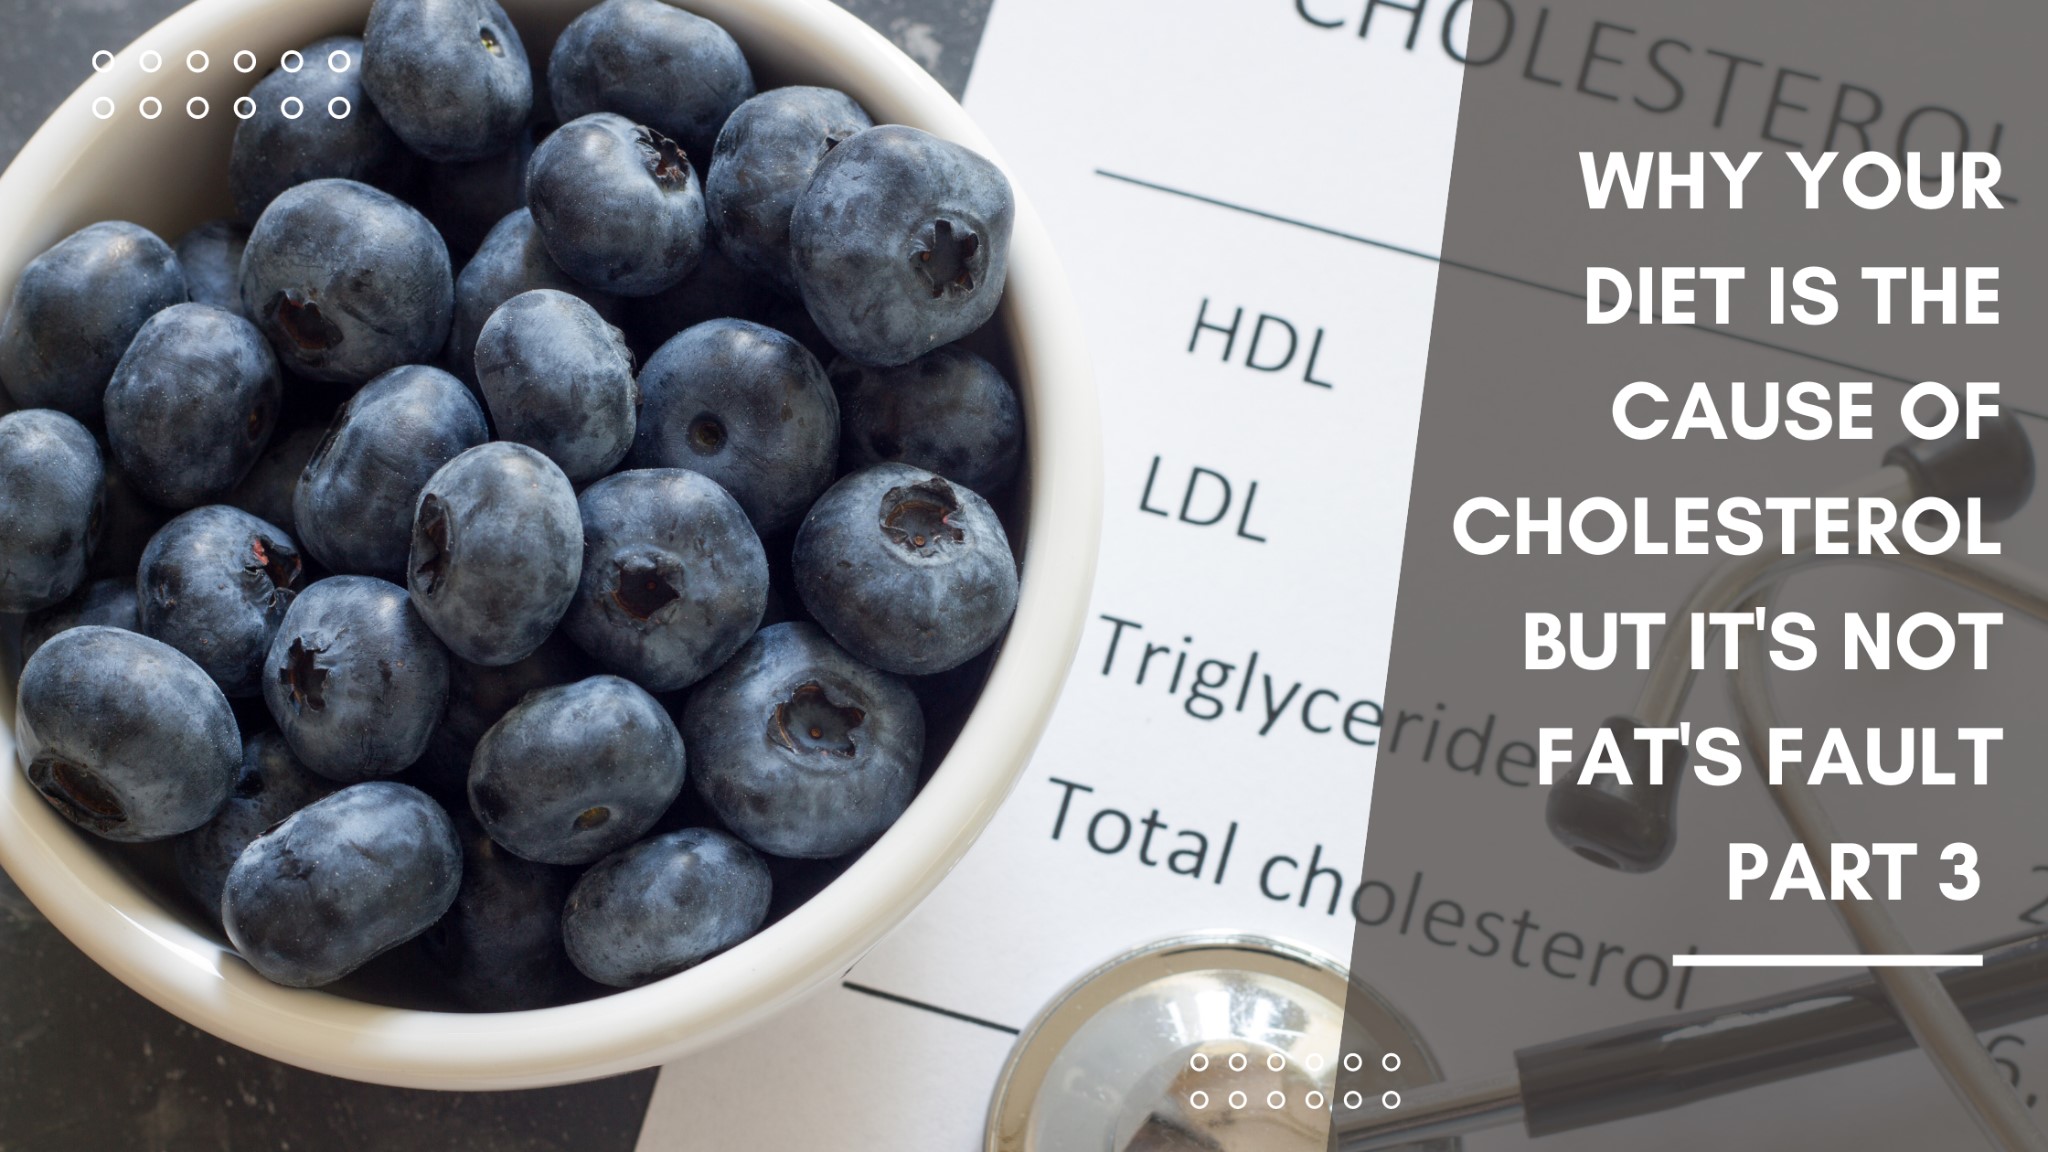 What Food In Your Diet Causes High Cholesterol?